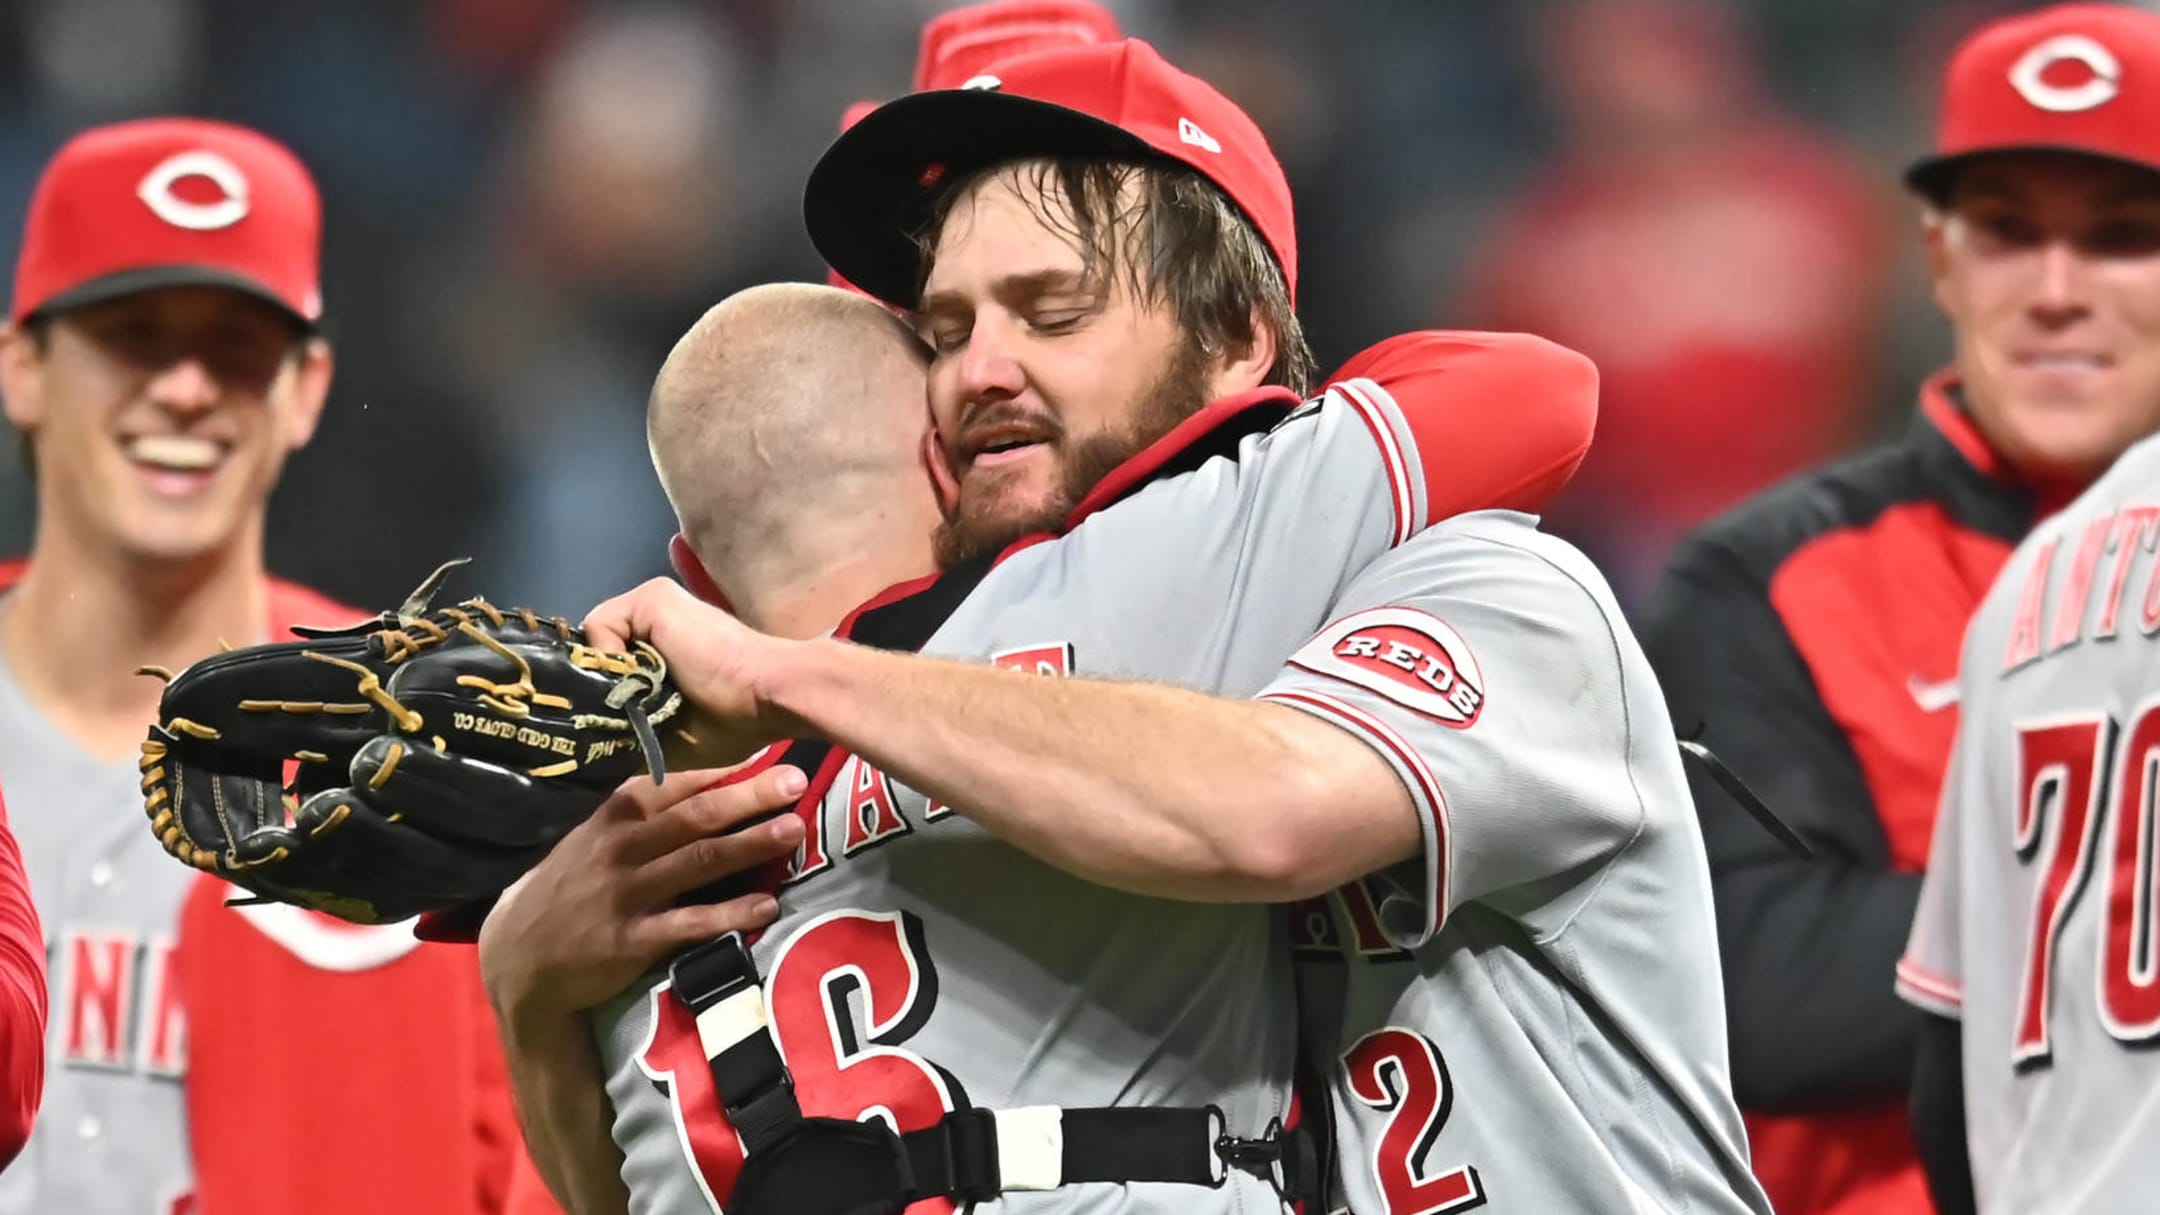 Wade Miley credits tattoo for bringing luck in no-hitter